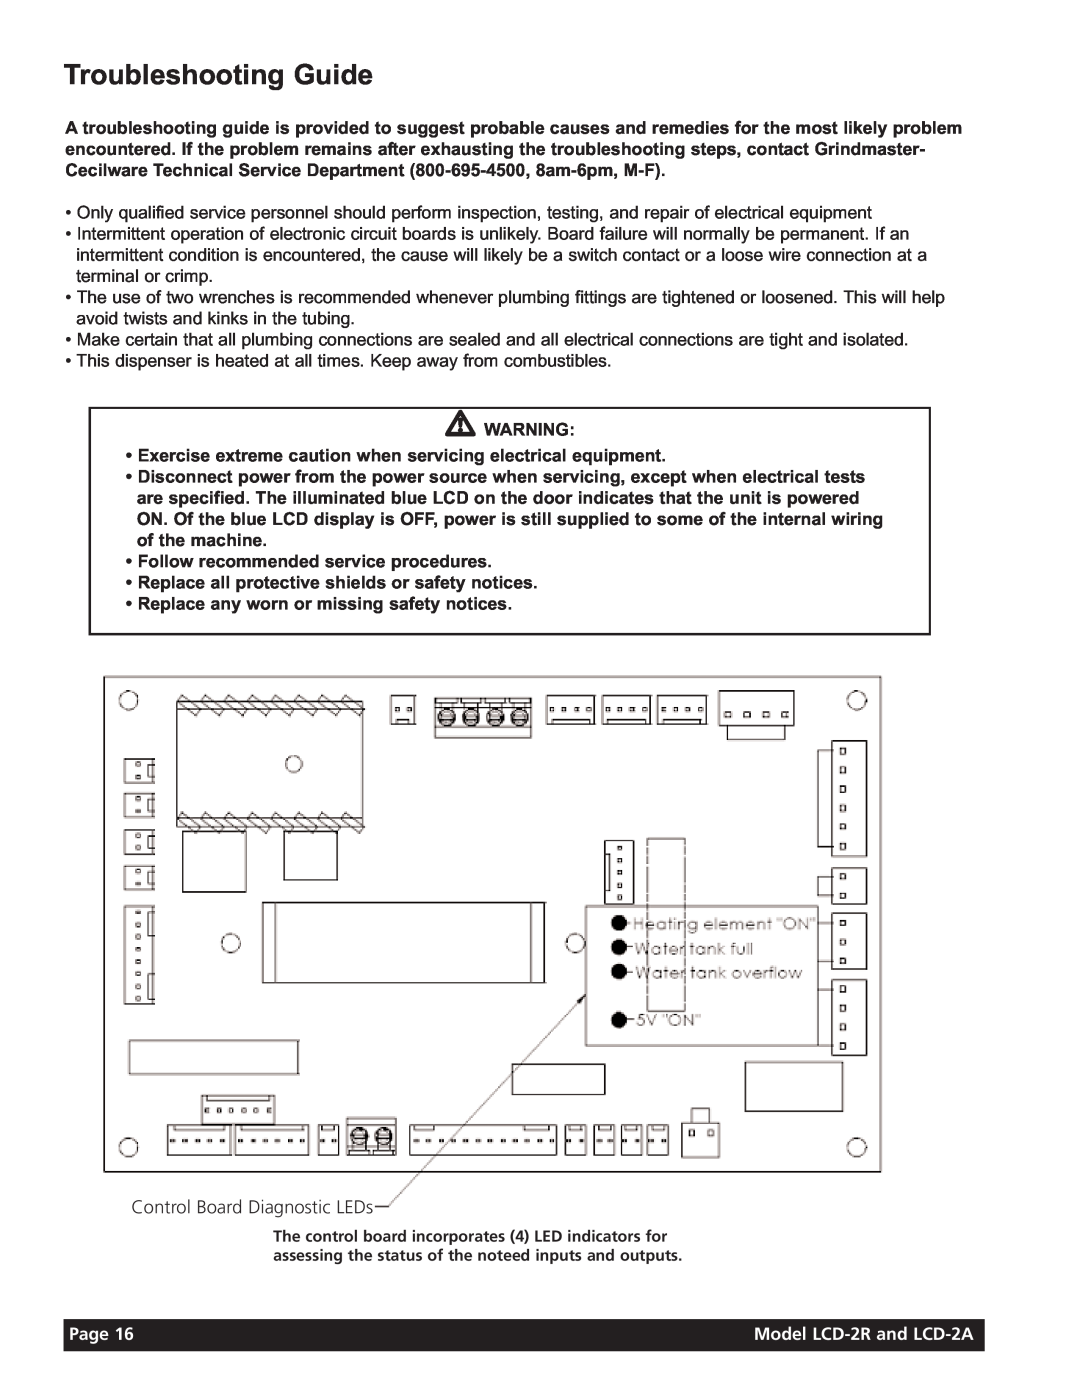 Grindmaster instruction manual Troubleshooting Guide, Control Board Diagnostic LEDs, Page, Model LCD-2Rand LCD-2A 